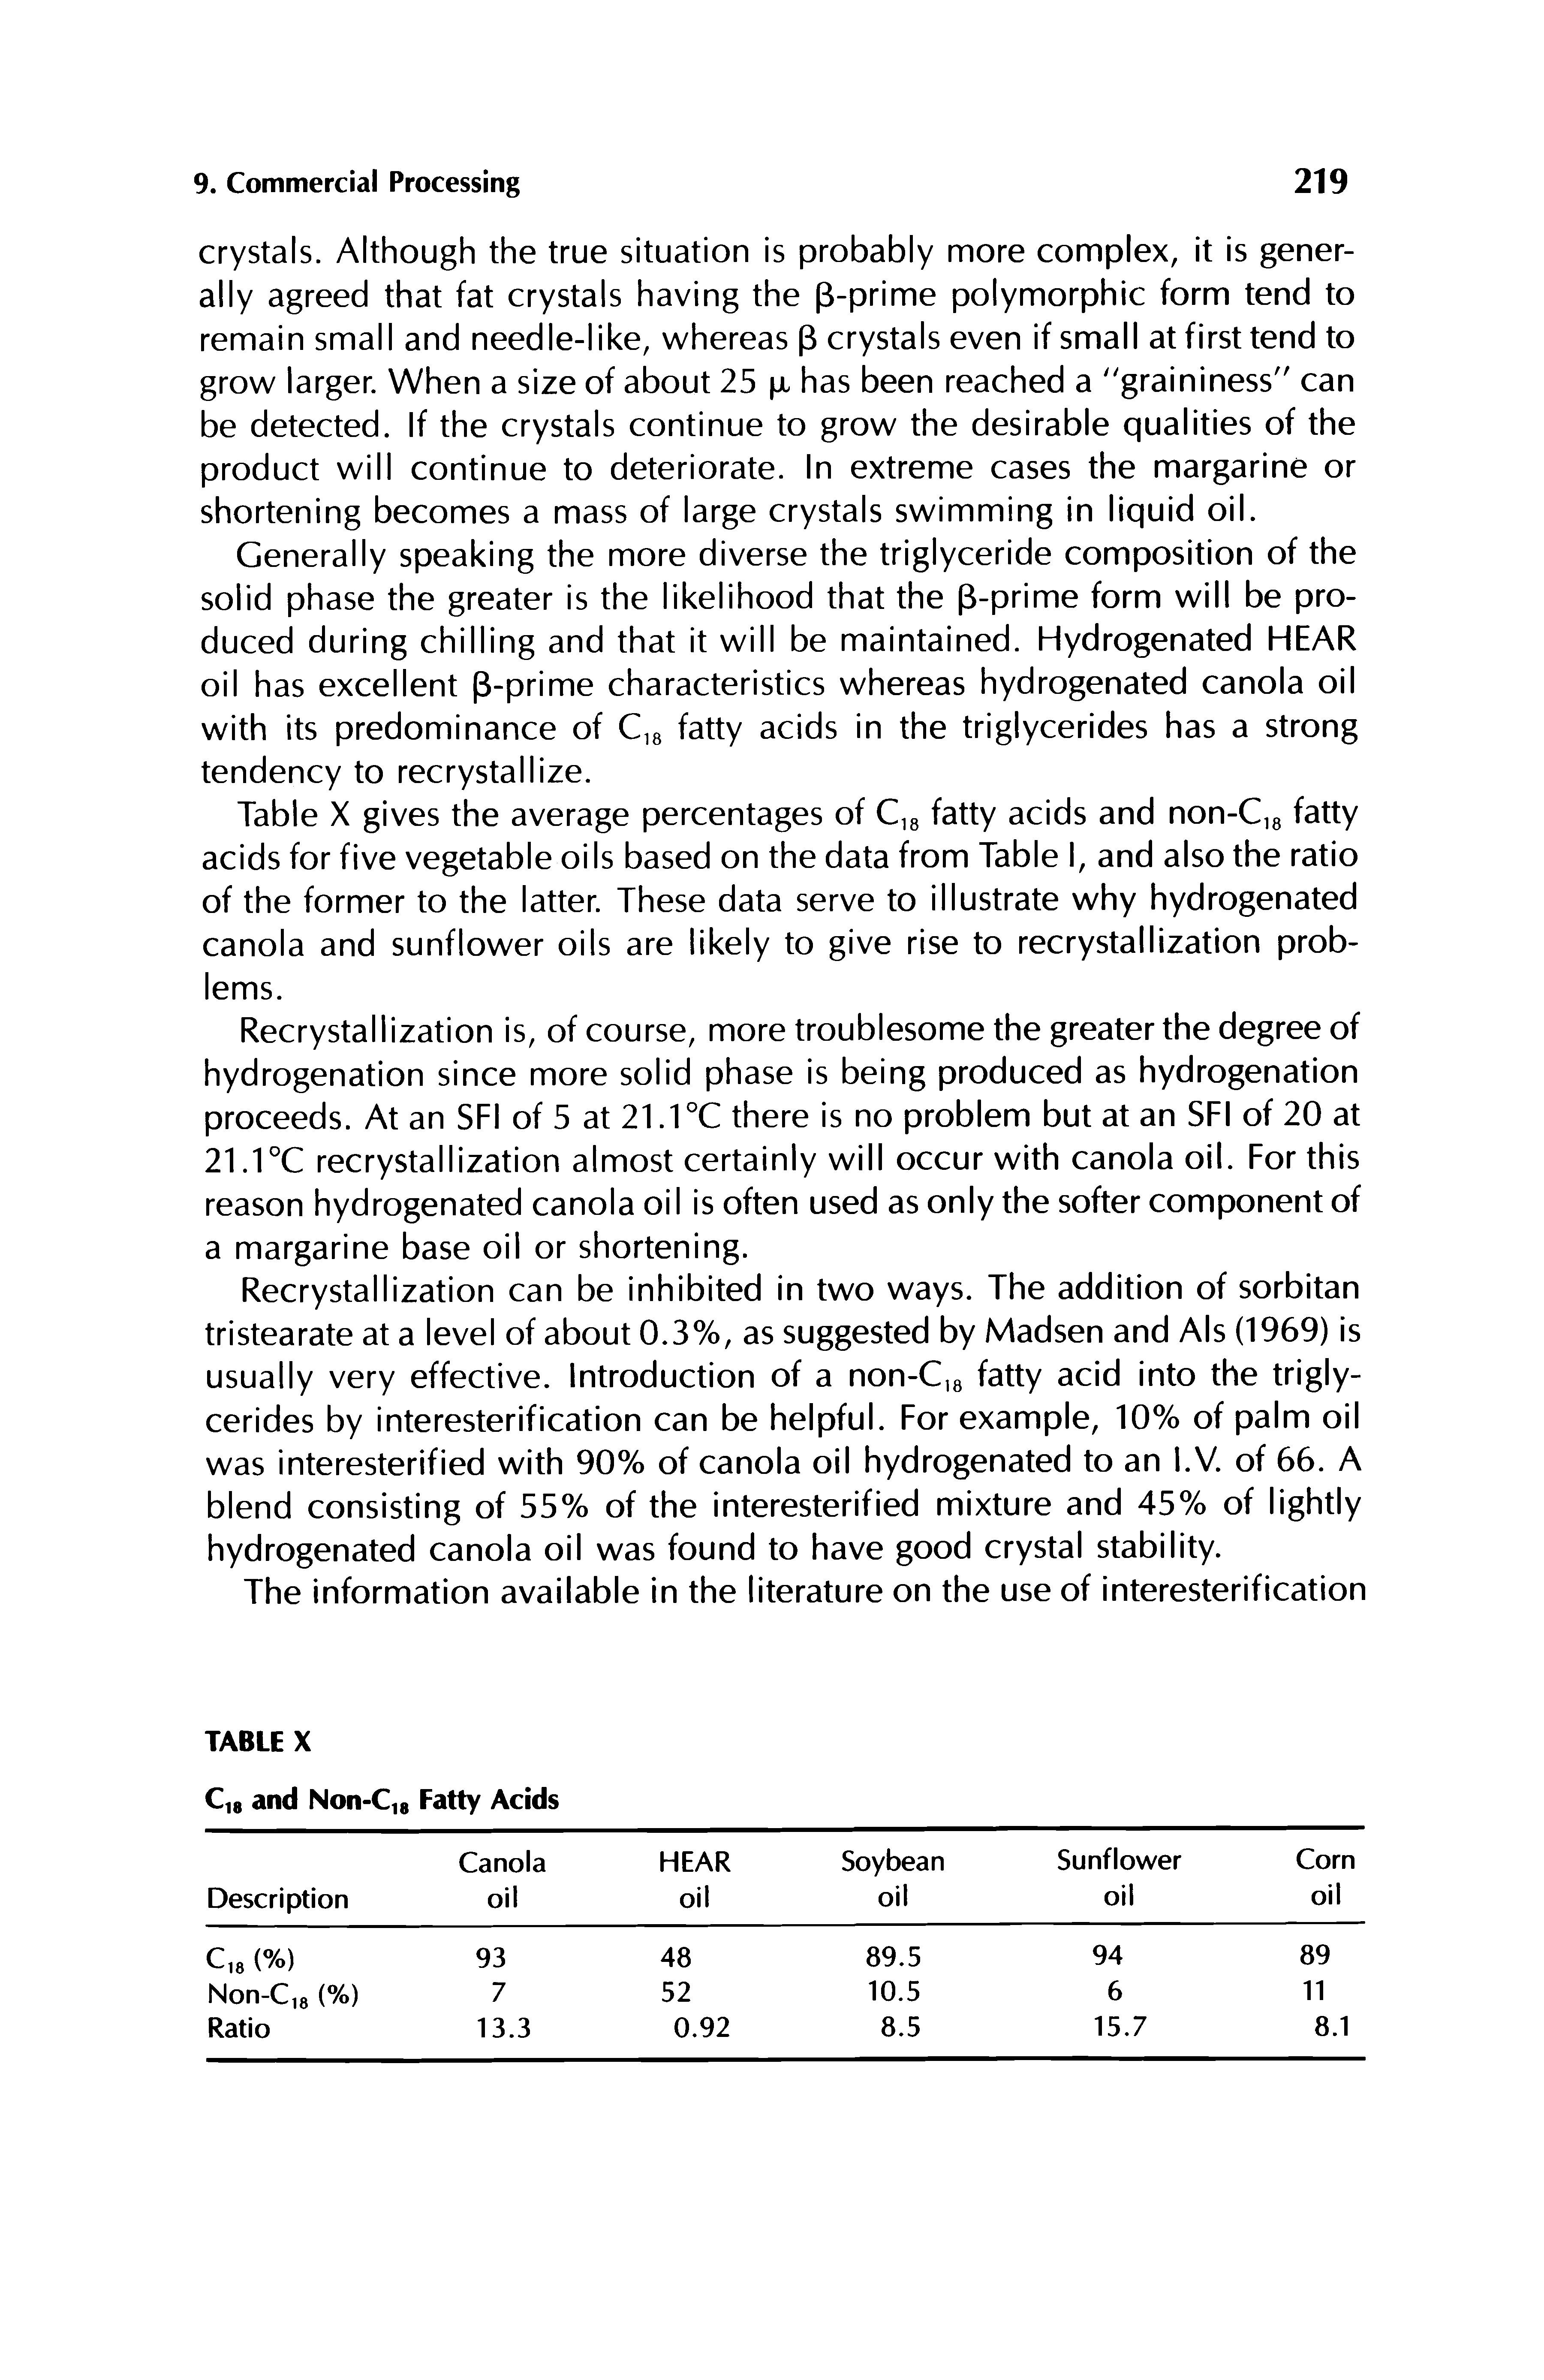 Table X gives the average percentages of Cig fatty acids and non-Cig fatty acids for five vegetable oils based on the data from Table I, and also the ratio of the former to the latter. These data serve to illustrate why hydrogenated canola and sunflower oils are likely to give rise to recrystallization problems.